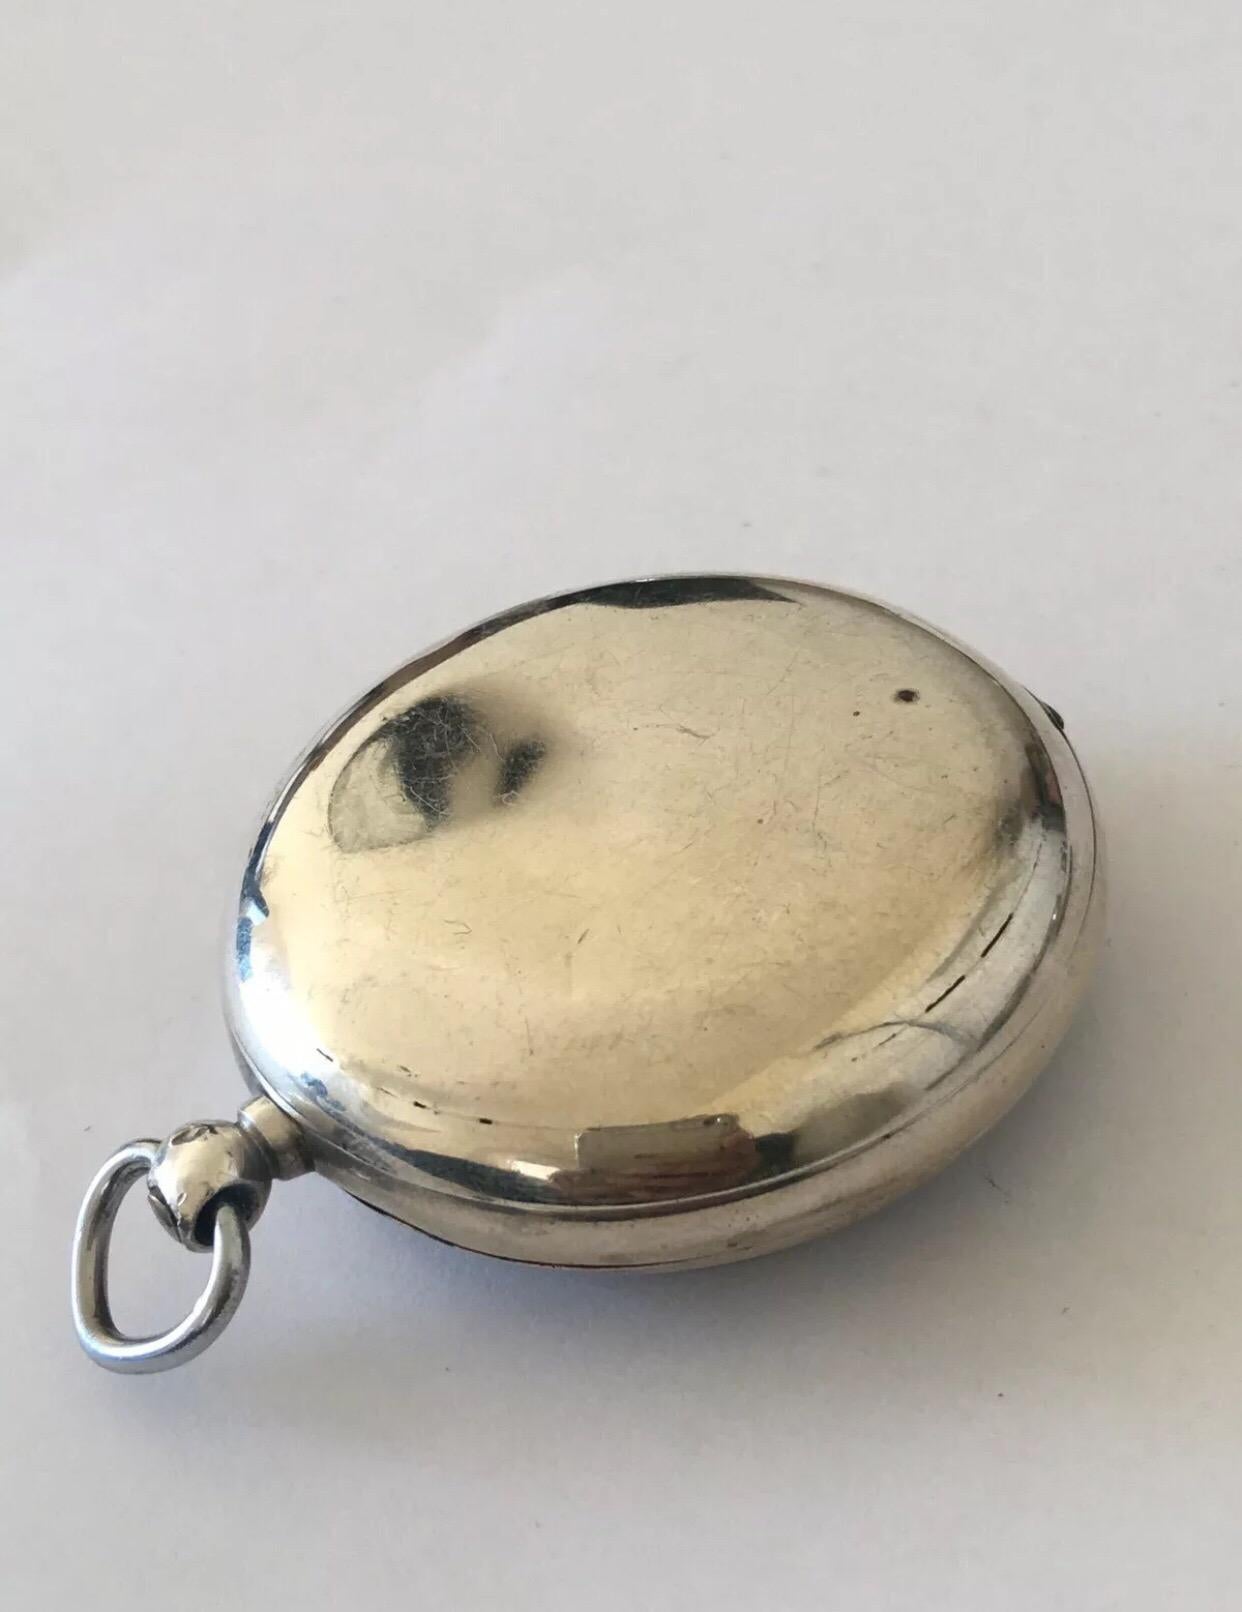 
Antique Silver Fusee Pocket Watch Signed Ashdown & Barlette, Maidstone.


This beautiful key-wind silver Fusee Gents watch is working and ticking well but I cannot guarantee time accuracy. 

It comes with a key.